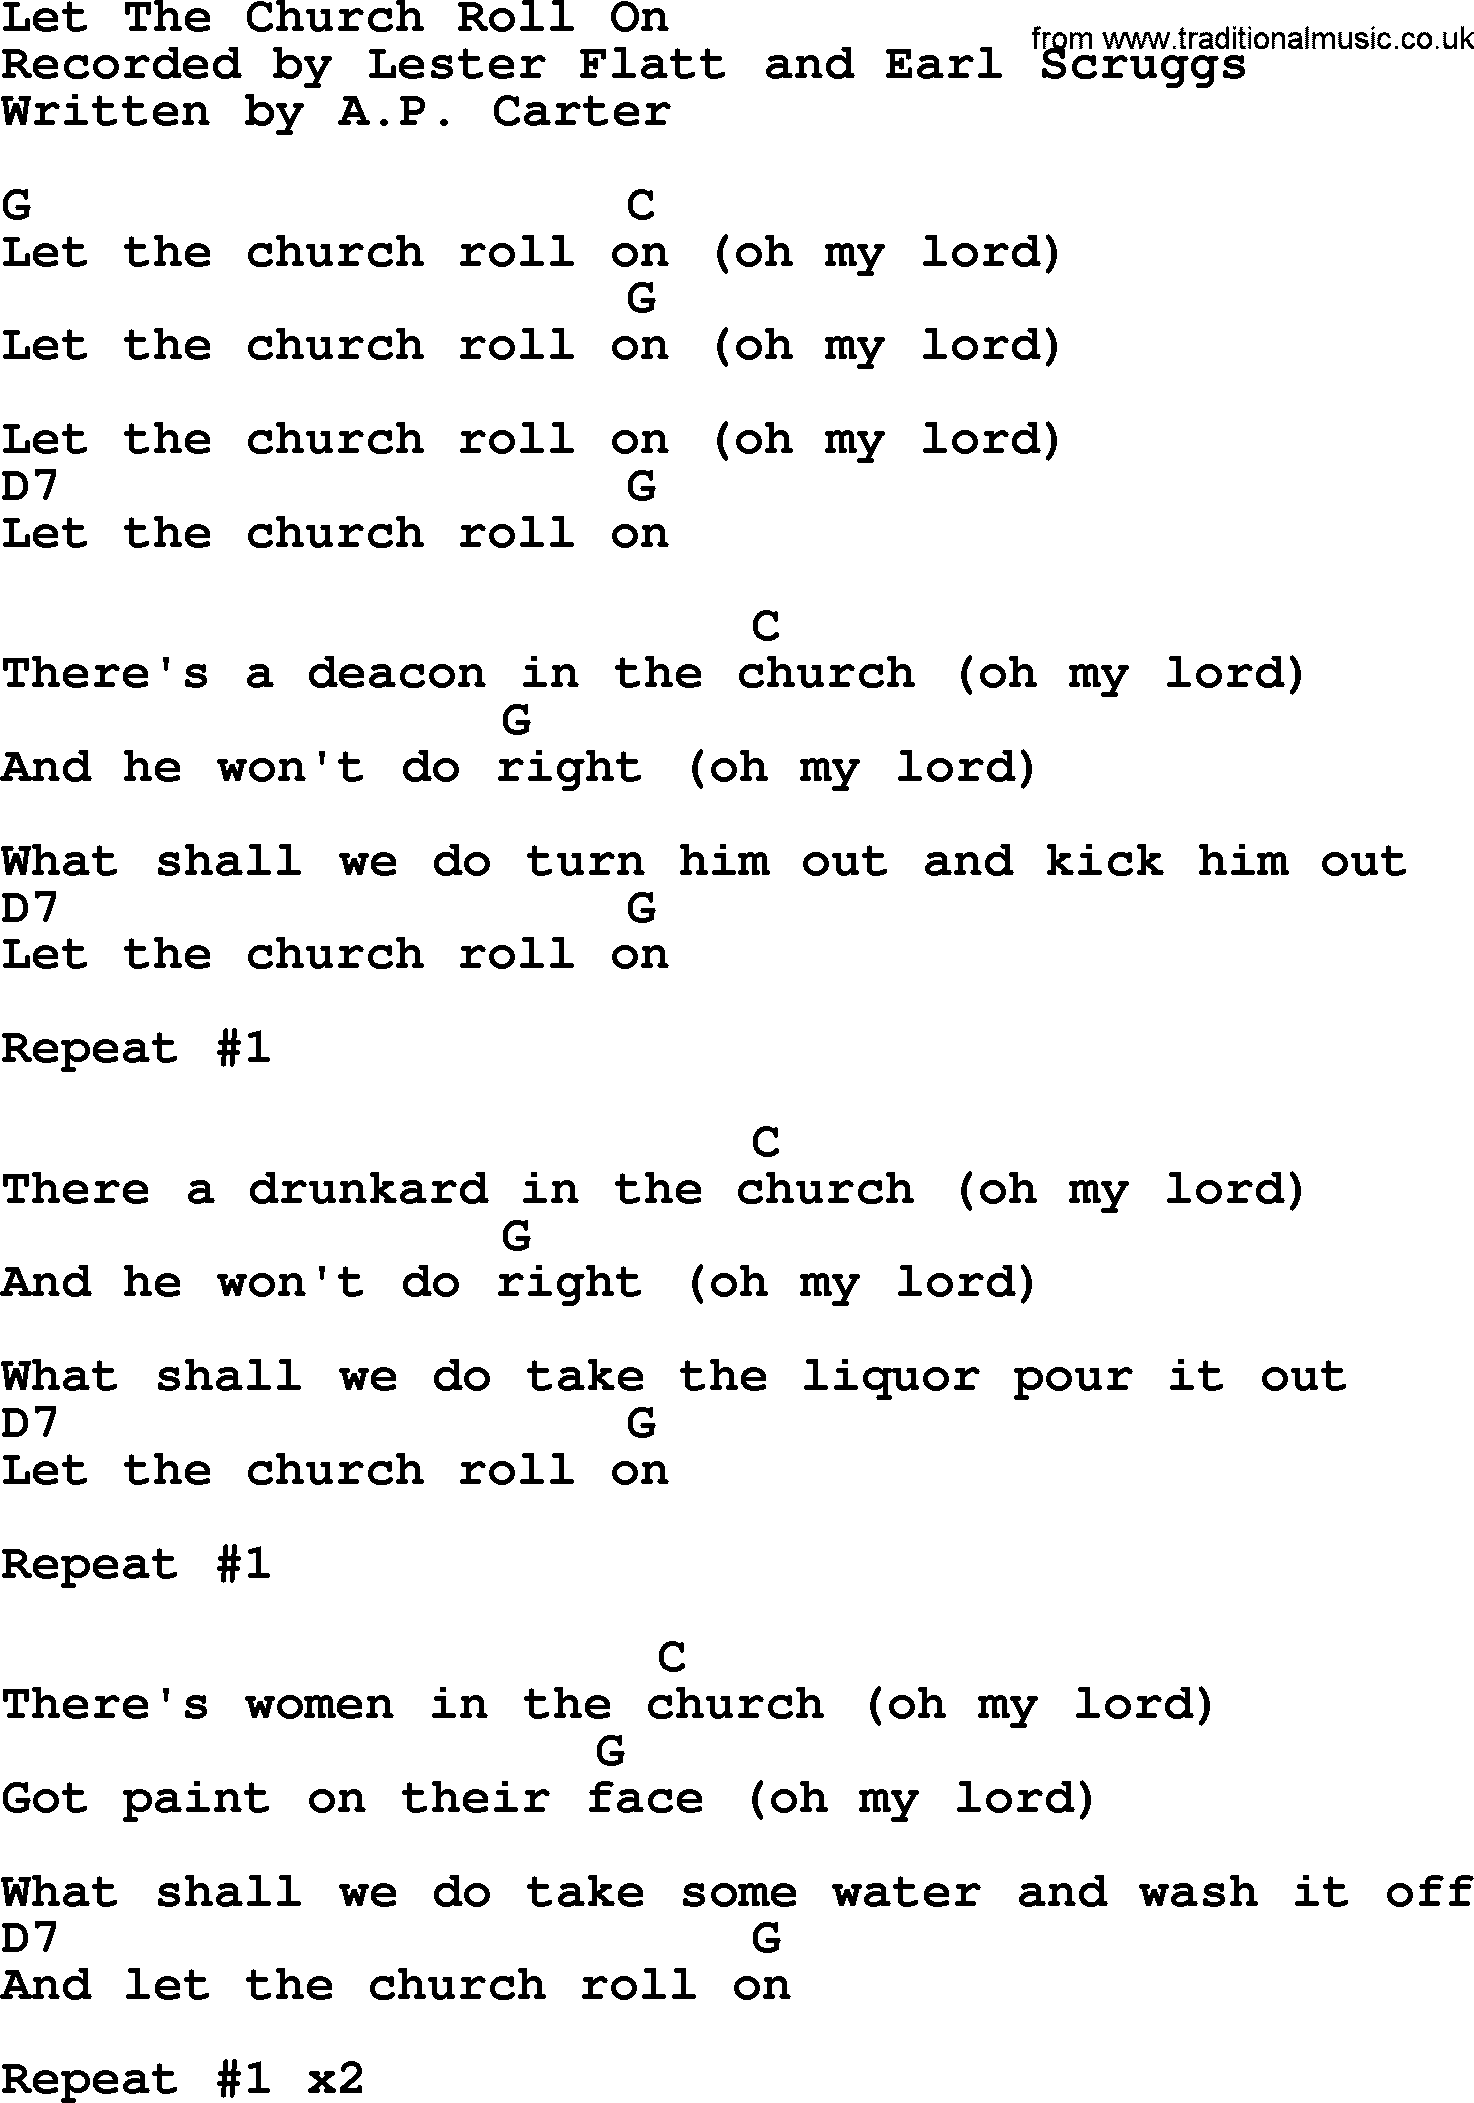 Bluegrass song: Let The Church Roll On, lyrics and chords